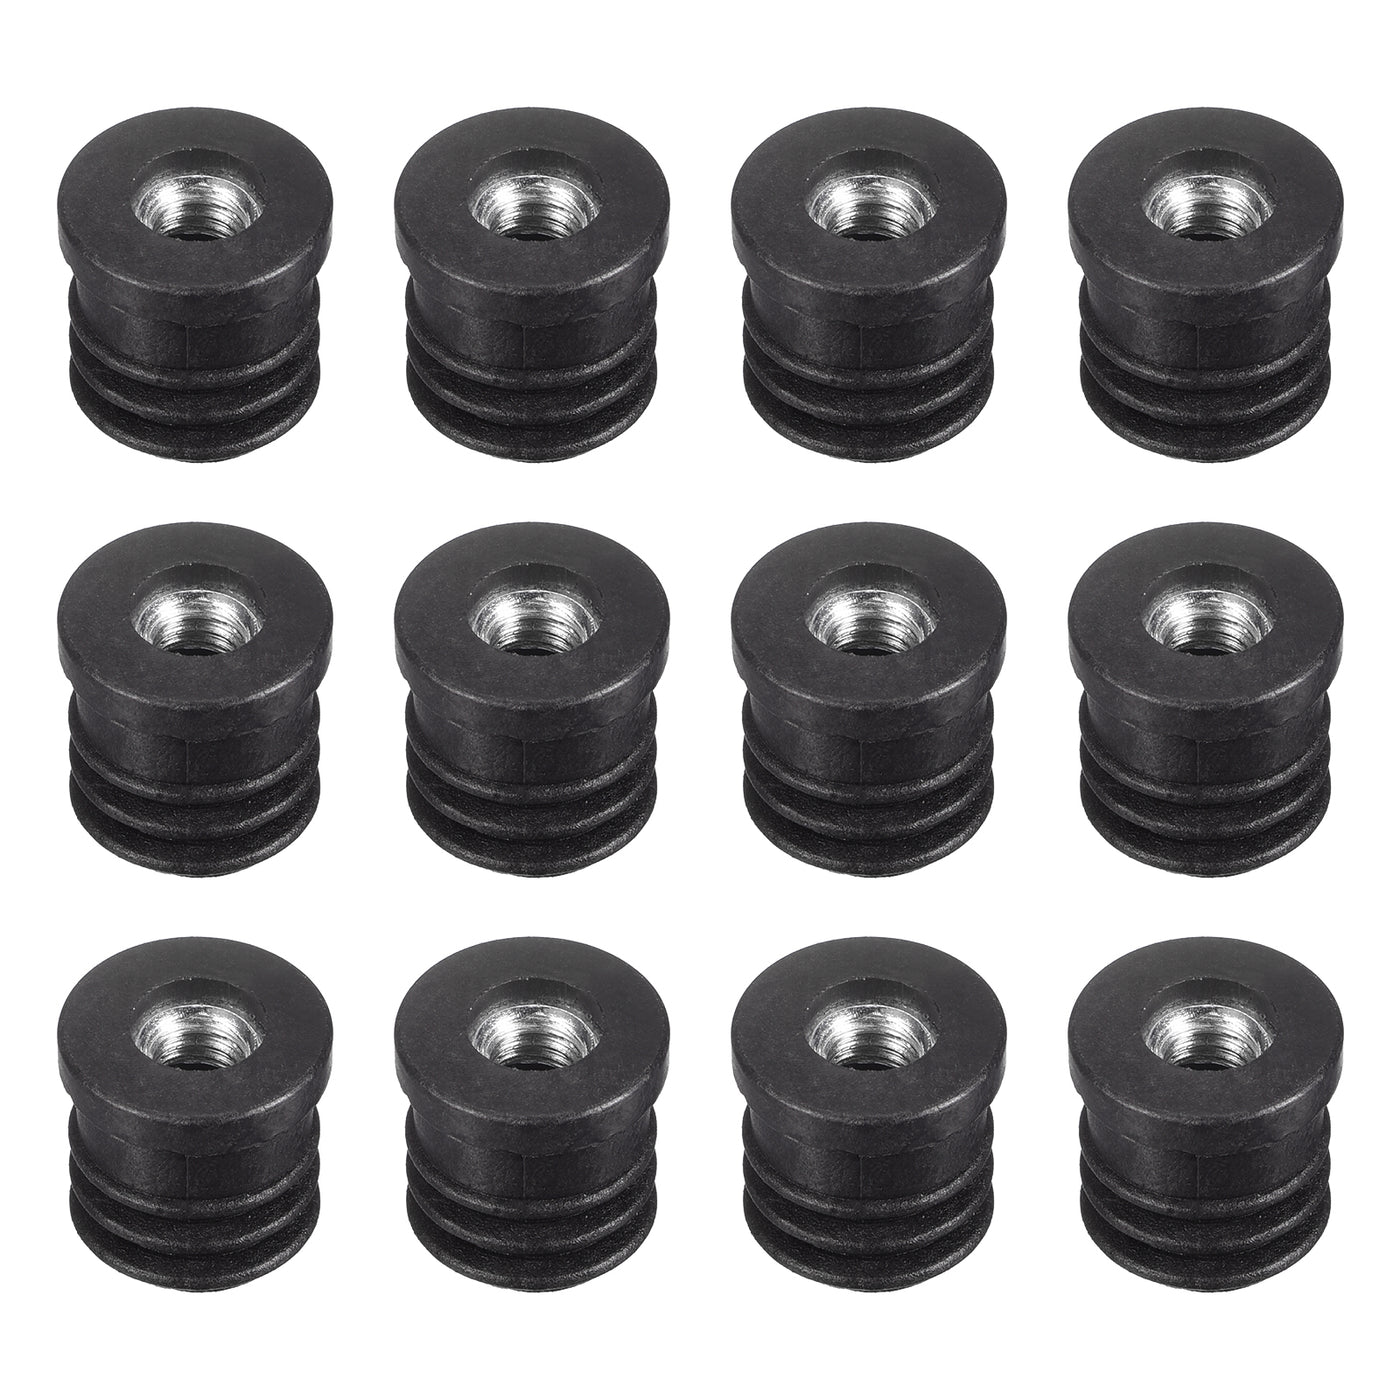 uxcell Uxcell 12Pcs 16mm/0.63" Caster Insert with Thread, Round M6 Thread for Furniture